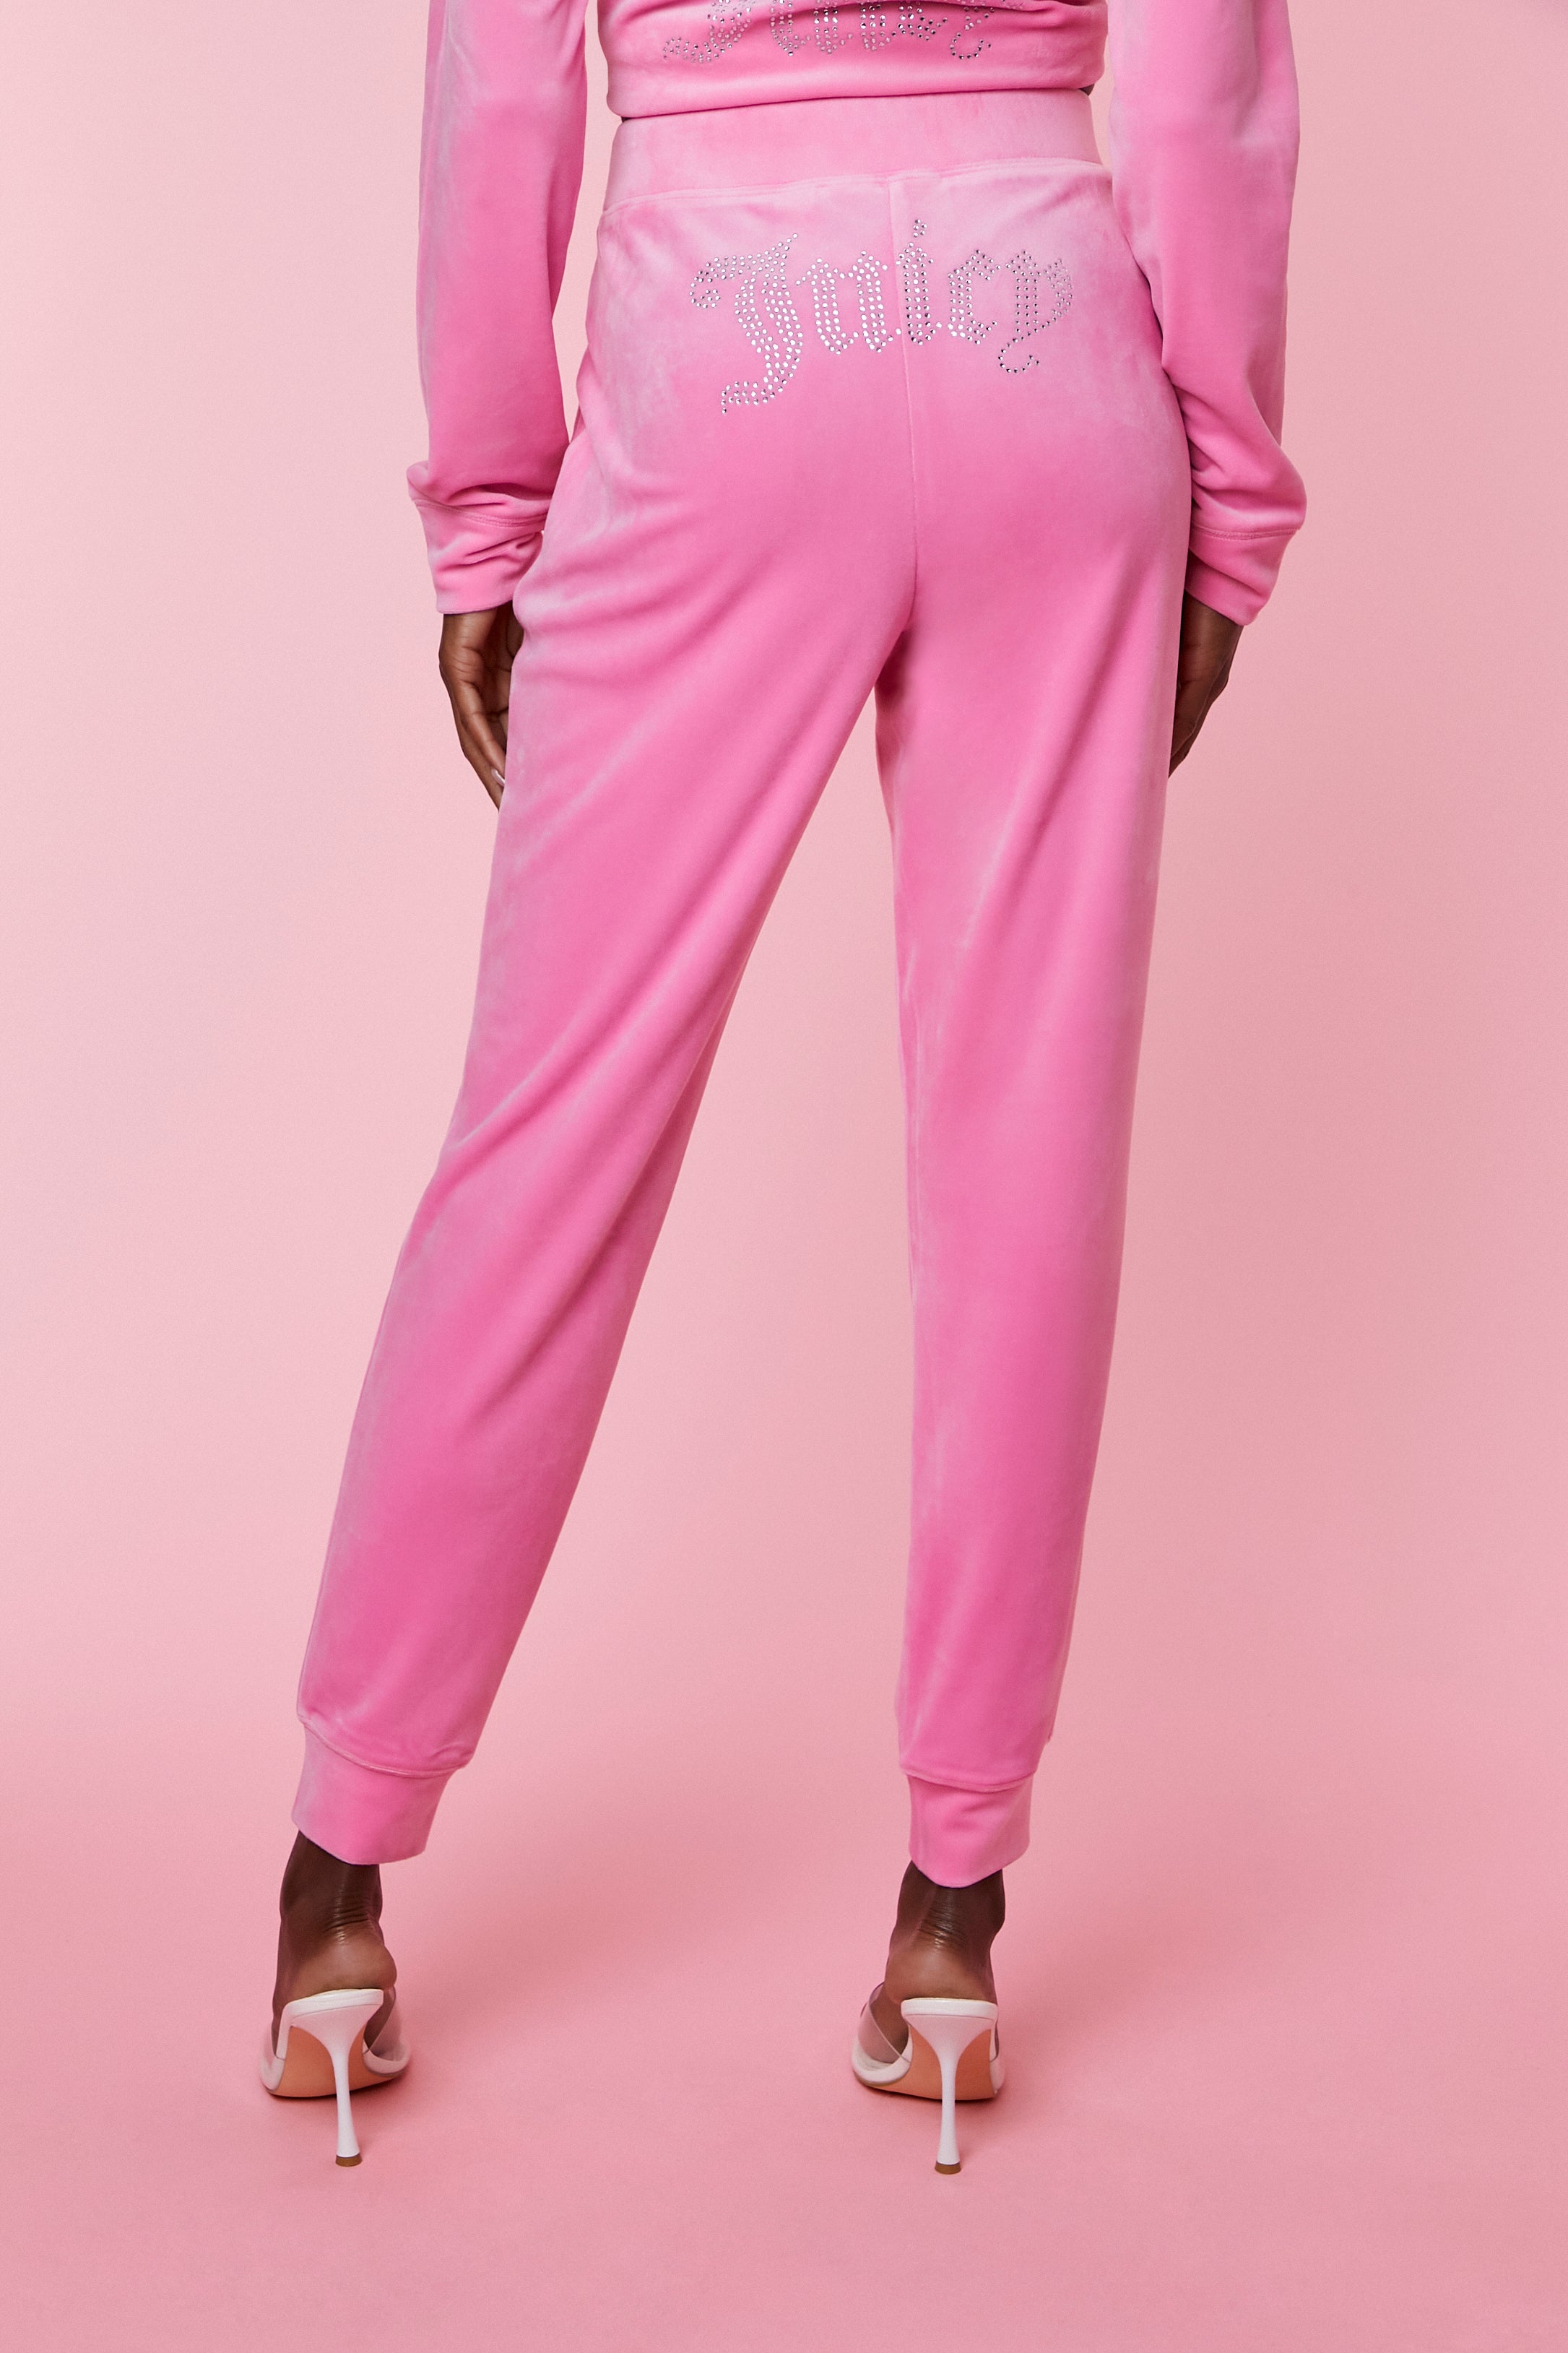 Hot pink Juicy Couture Rhinestone Joggers  5